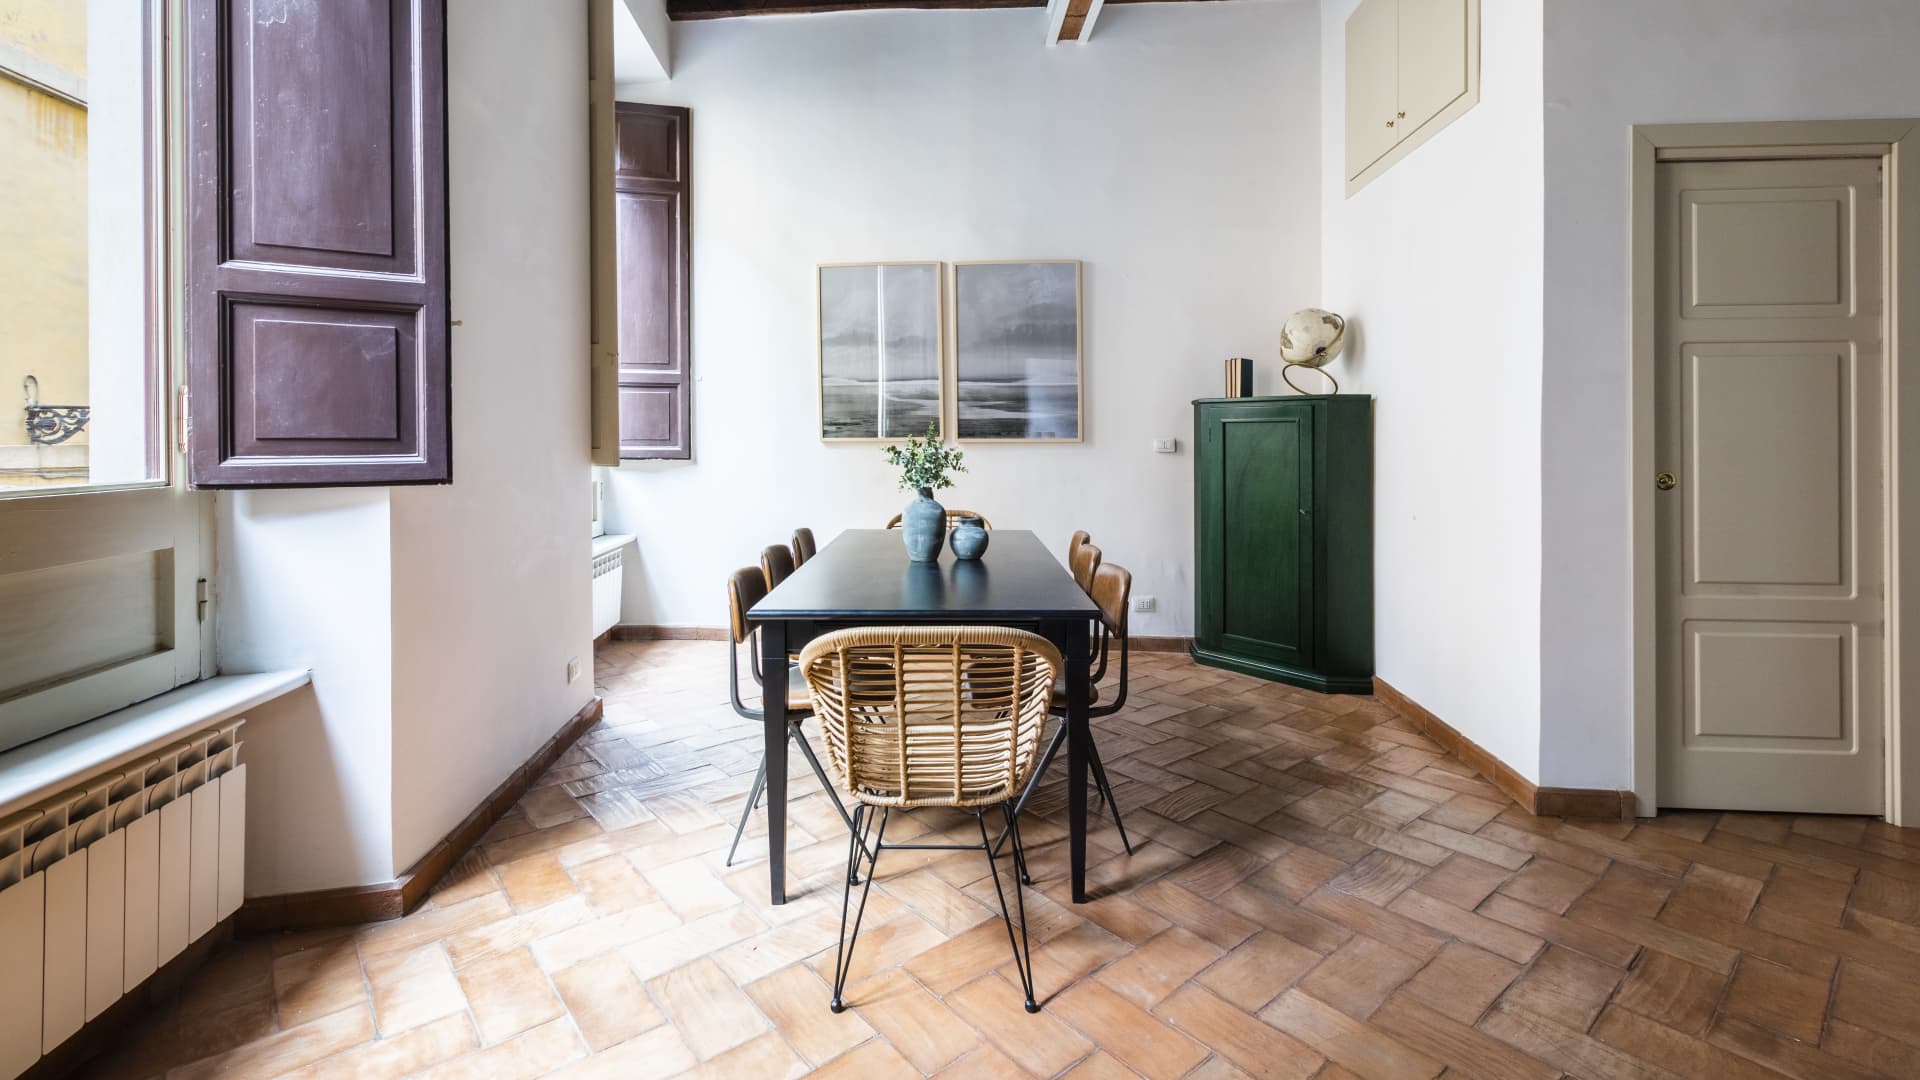 A four-bedroom apartment in Rome that is available to rent through Sonder.